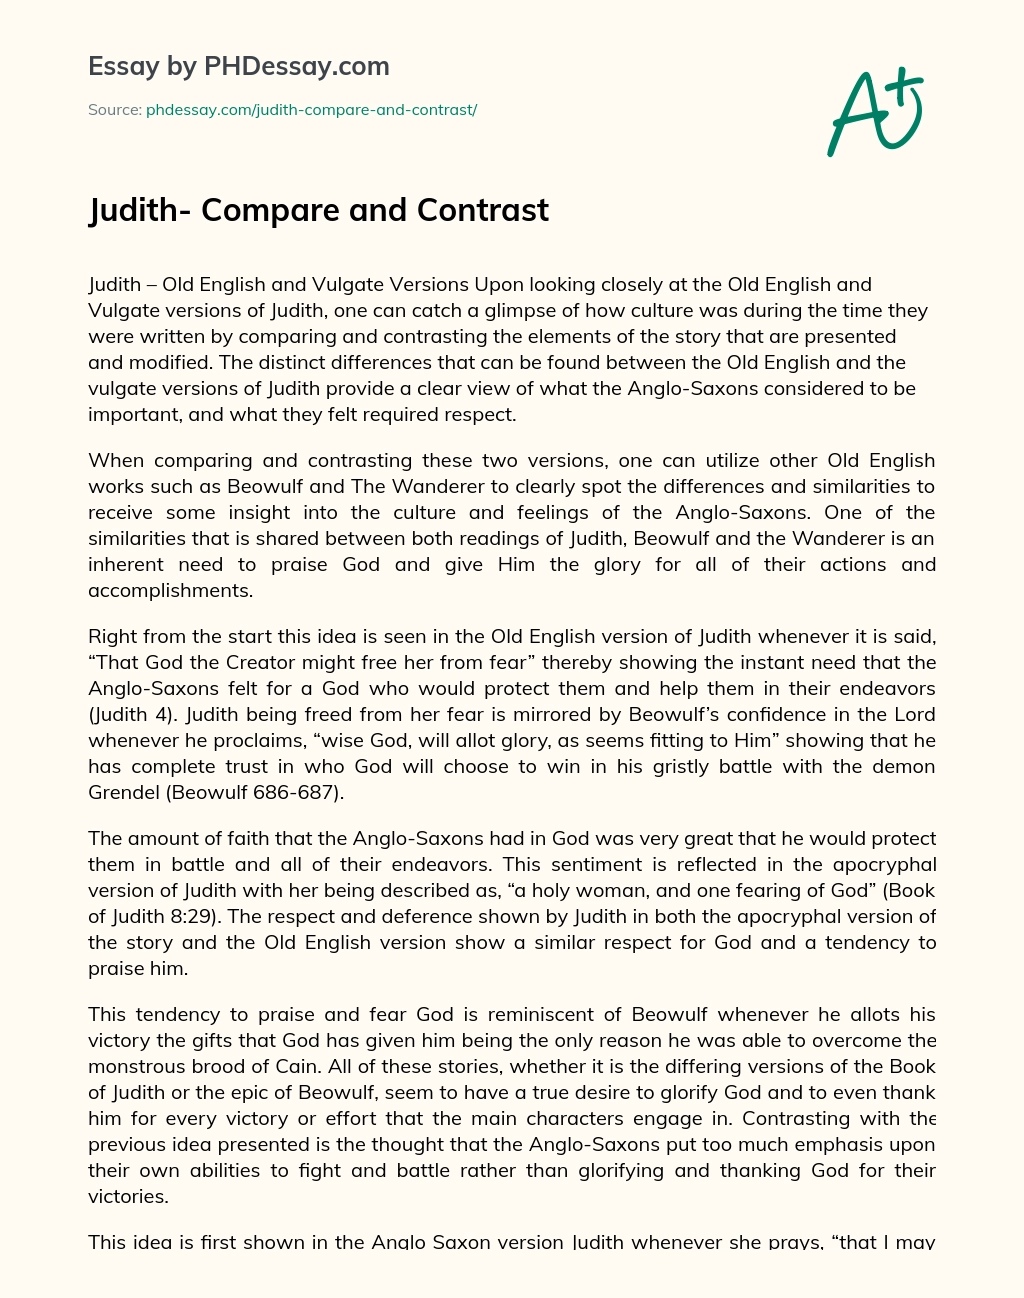 Judith- Compare and Contrast essay